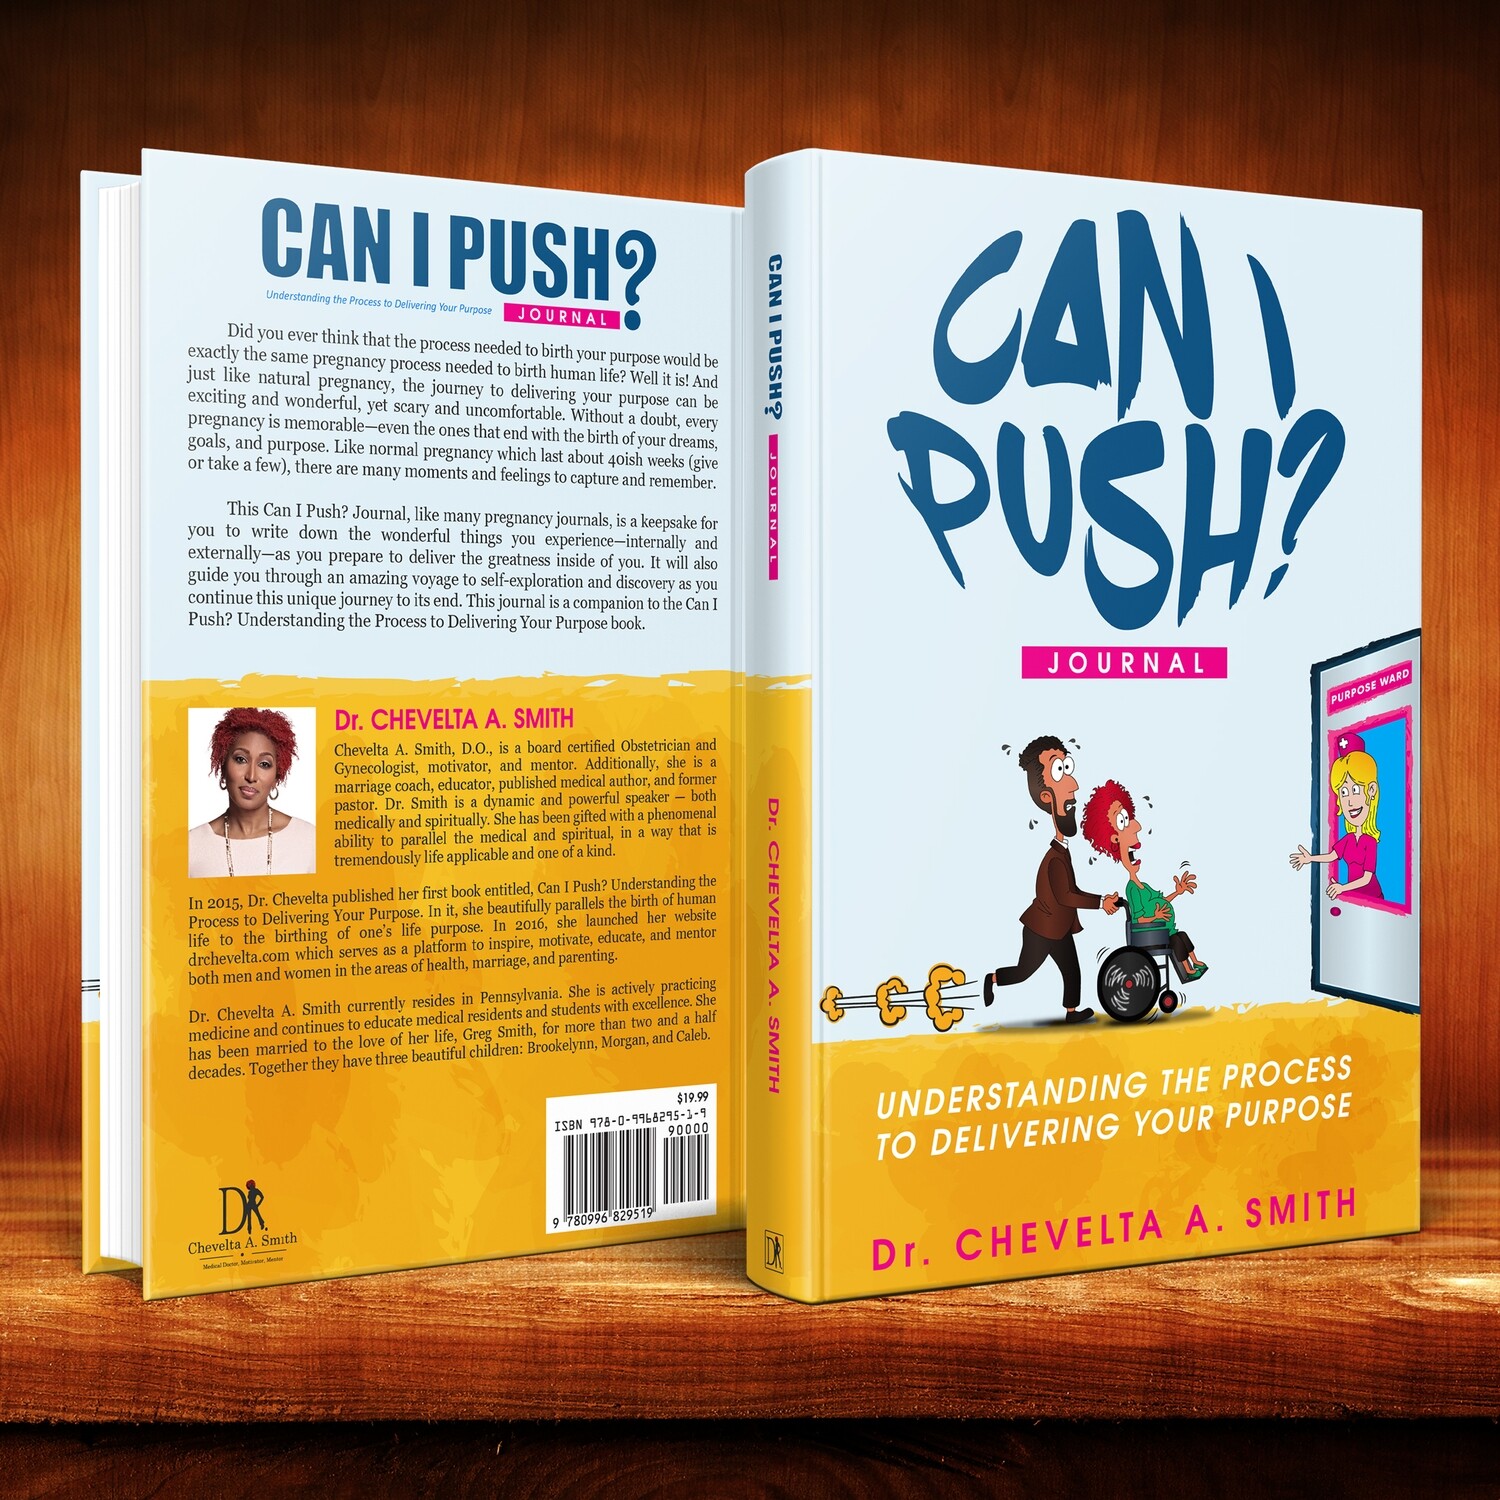 Can I Push? Journal